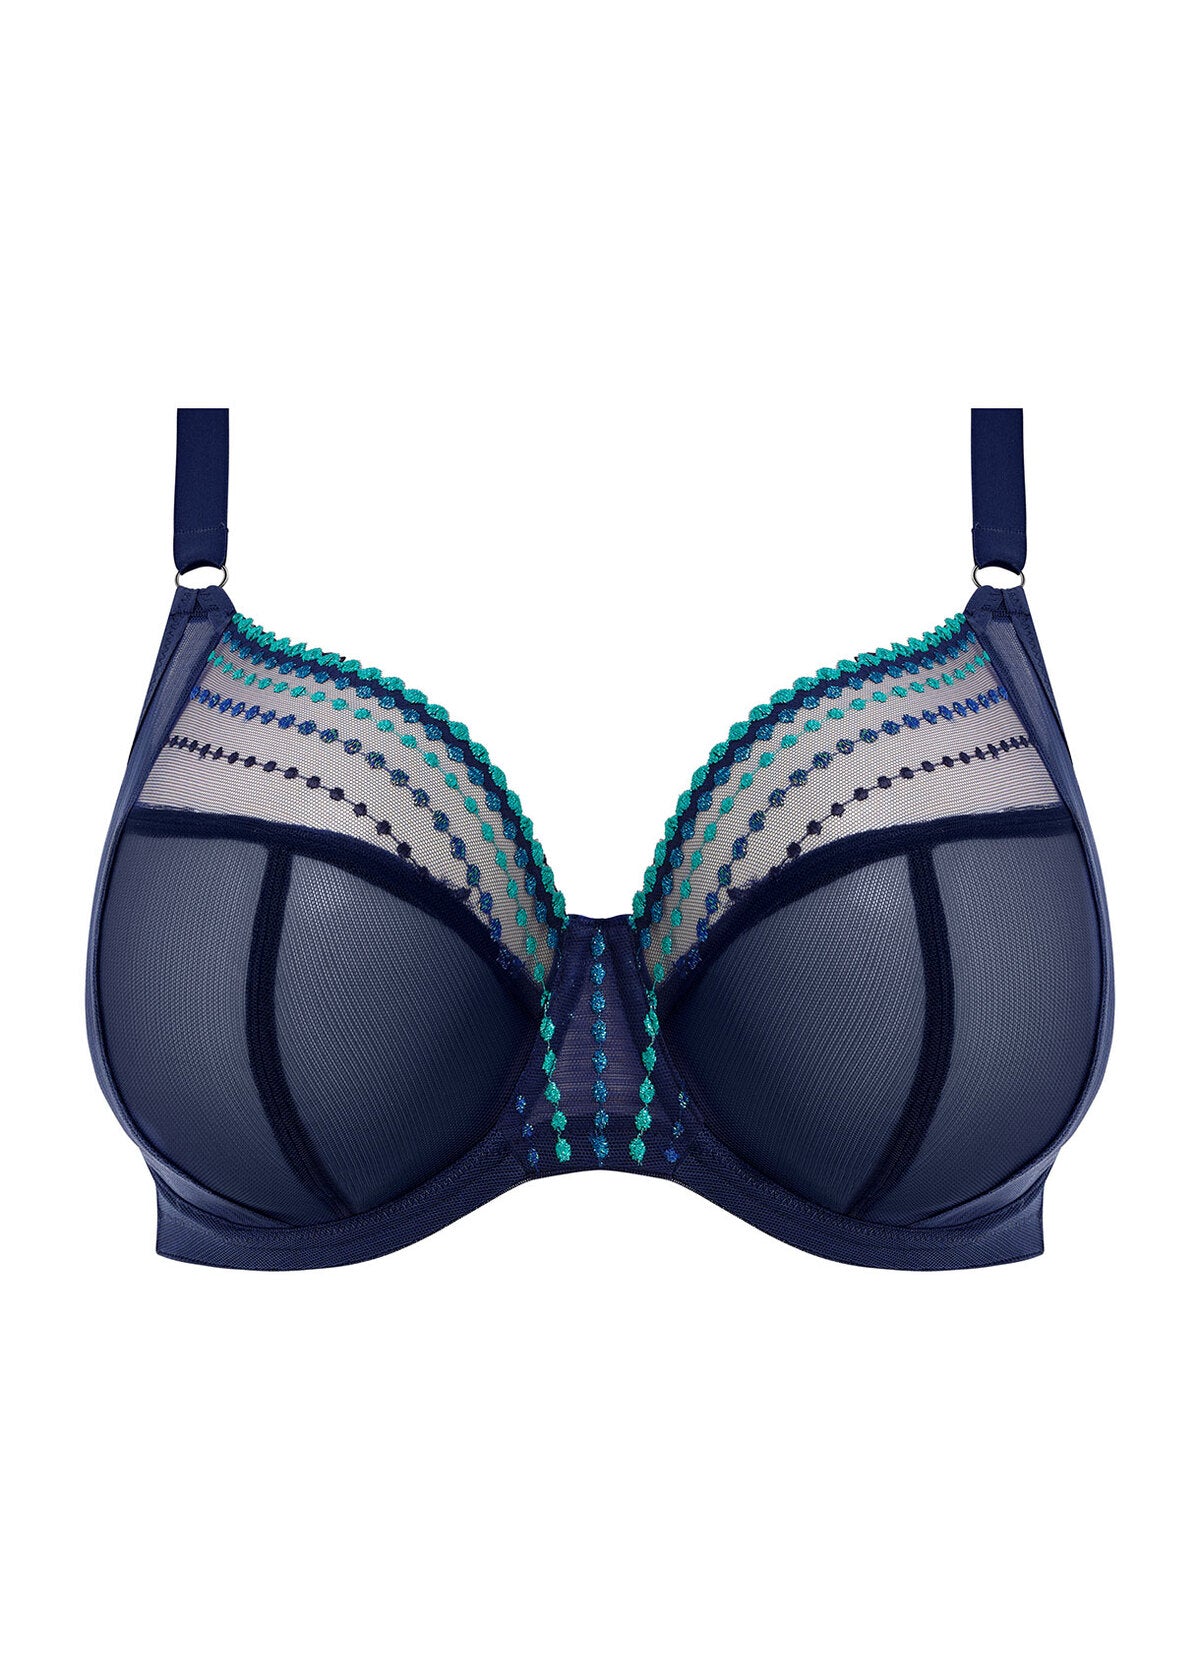 product bview of Elomi Matilda Underwire Plunge Bra in siren song